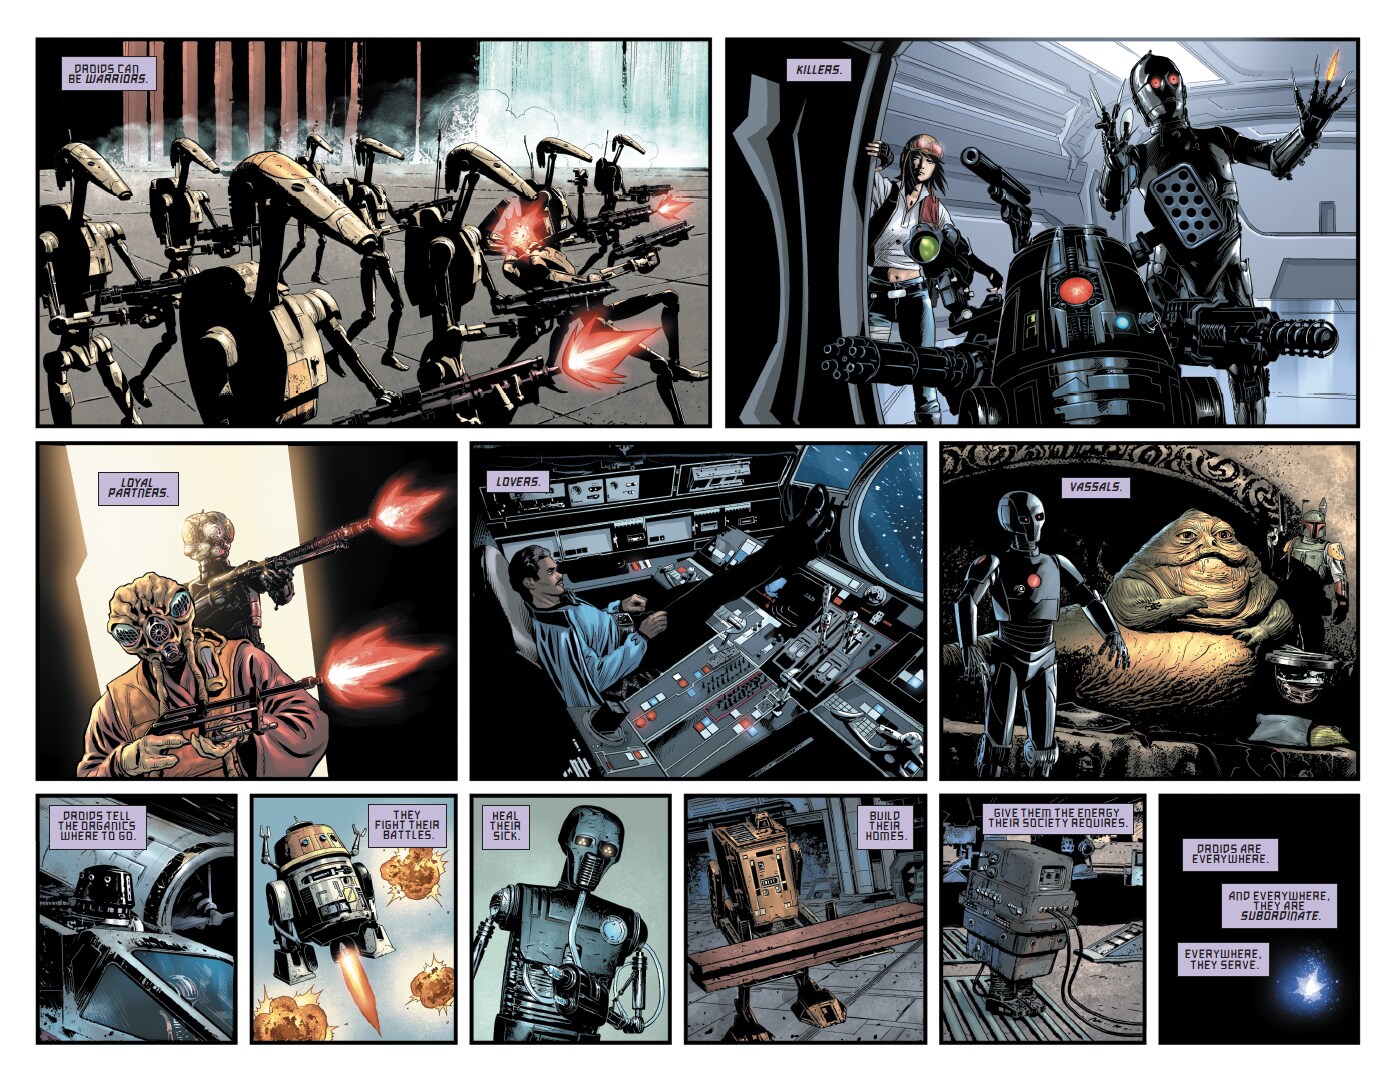 Dark Droids page 3 and 4